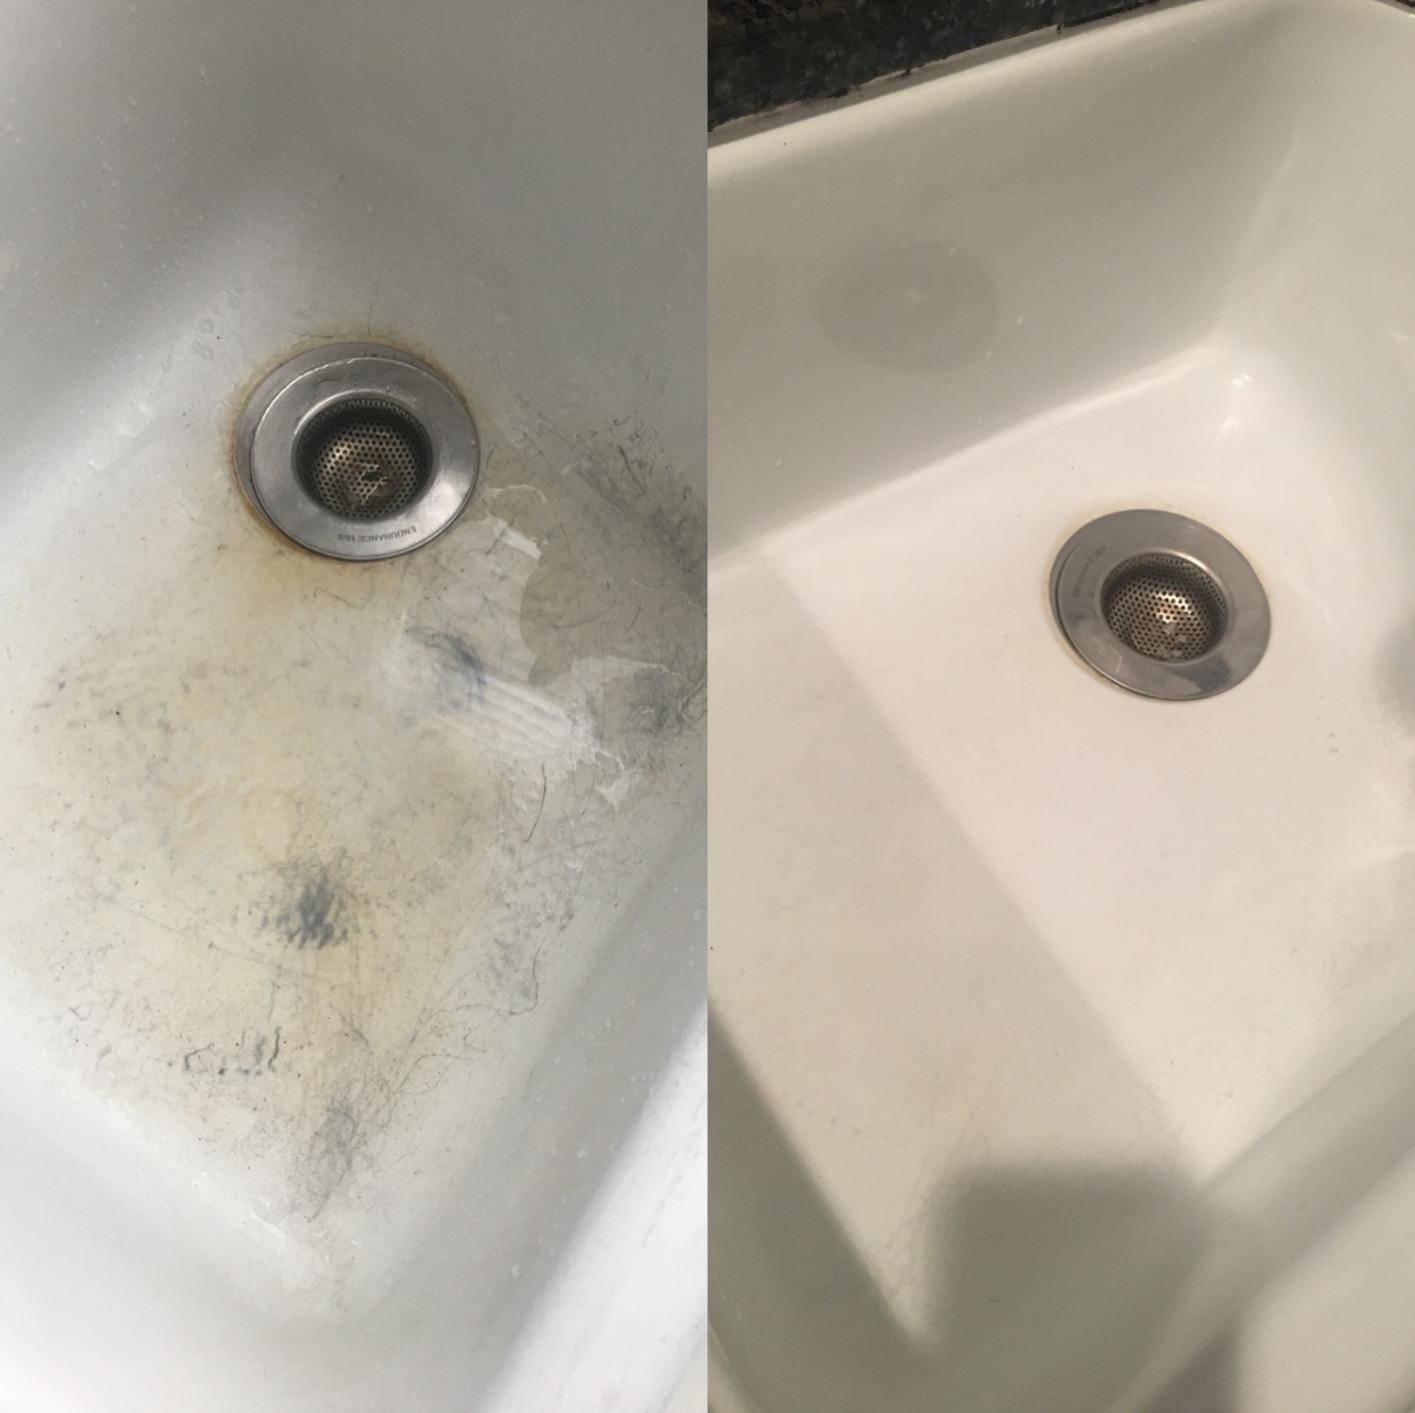 A porcelain sink before and after cleaning: on the left with grey scuffs and yellow staining, and on the right almost completely clean